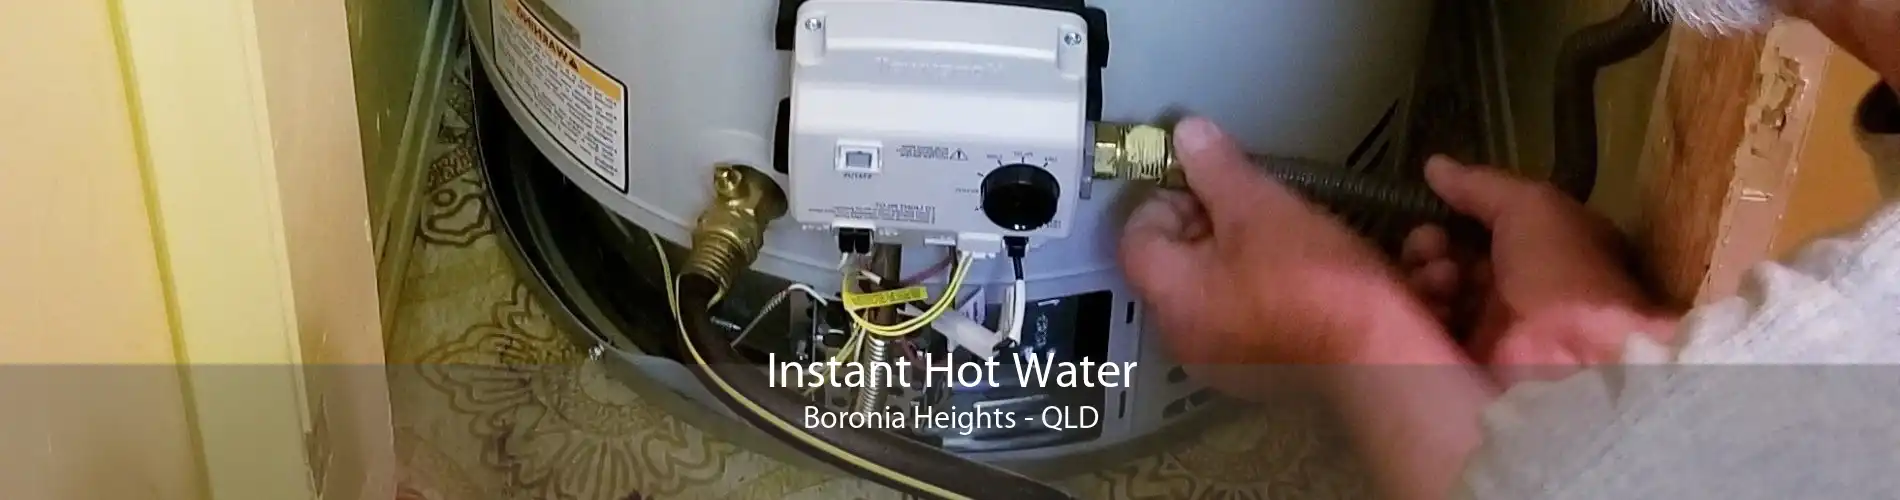 Instant Hot Water Boronia Heights - QLD